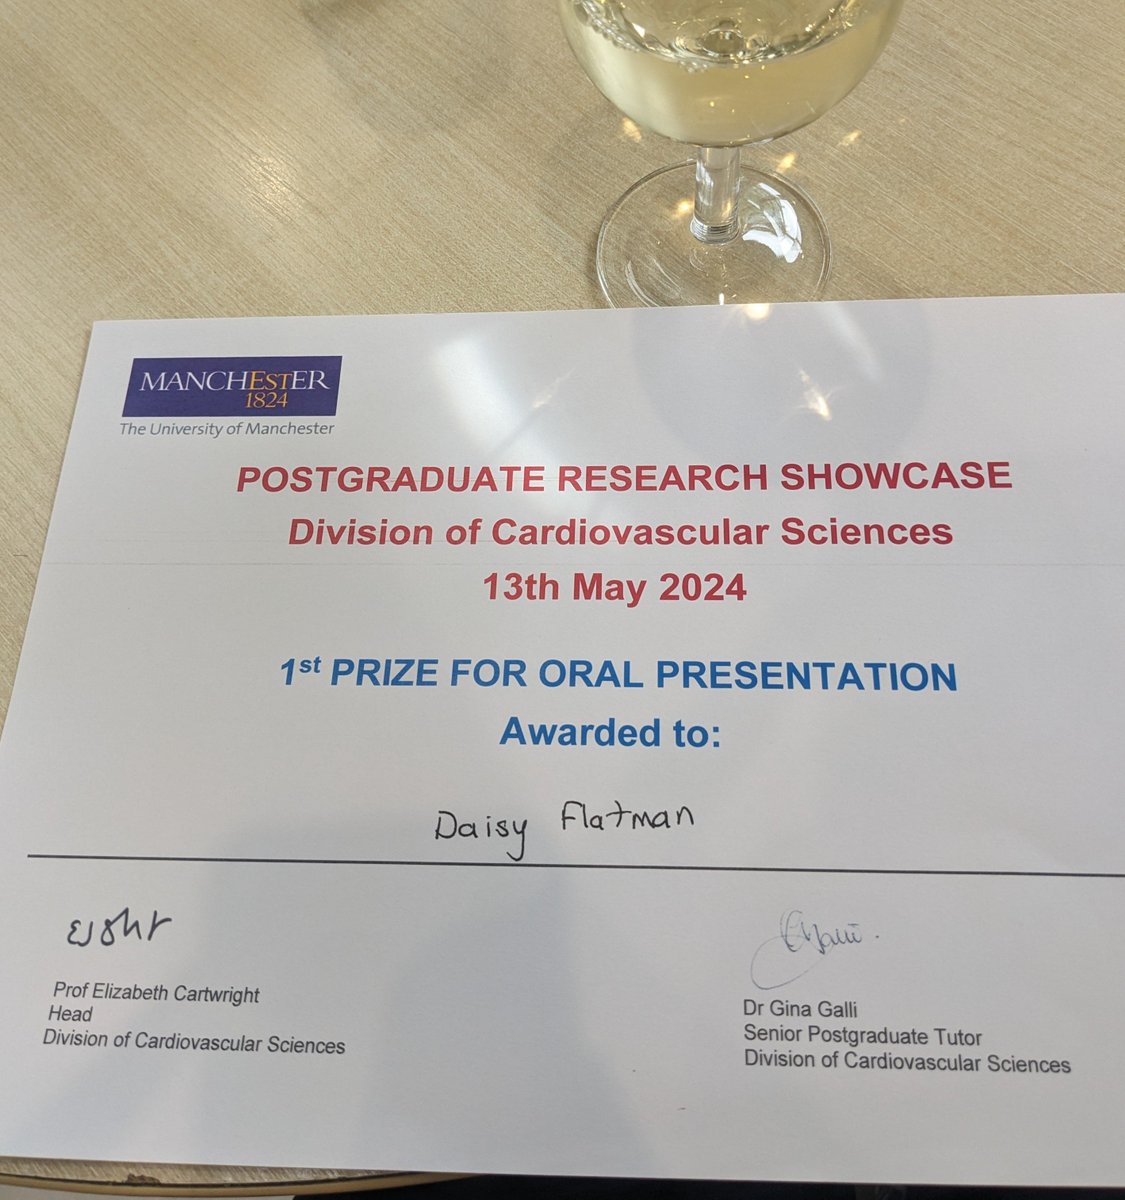 I had a great time at the @DCVS_UoM showcase today. I am really chuffed to have been awarded first prize for my talk! 🐟